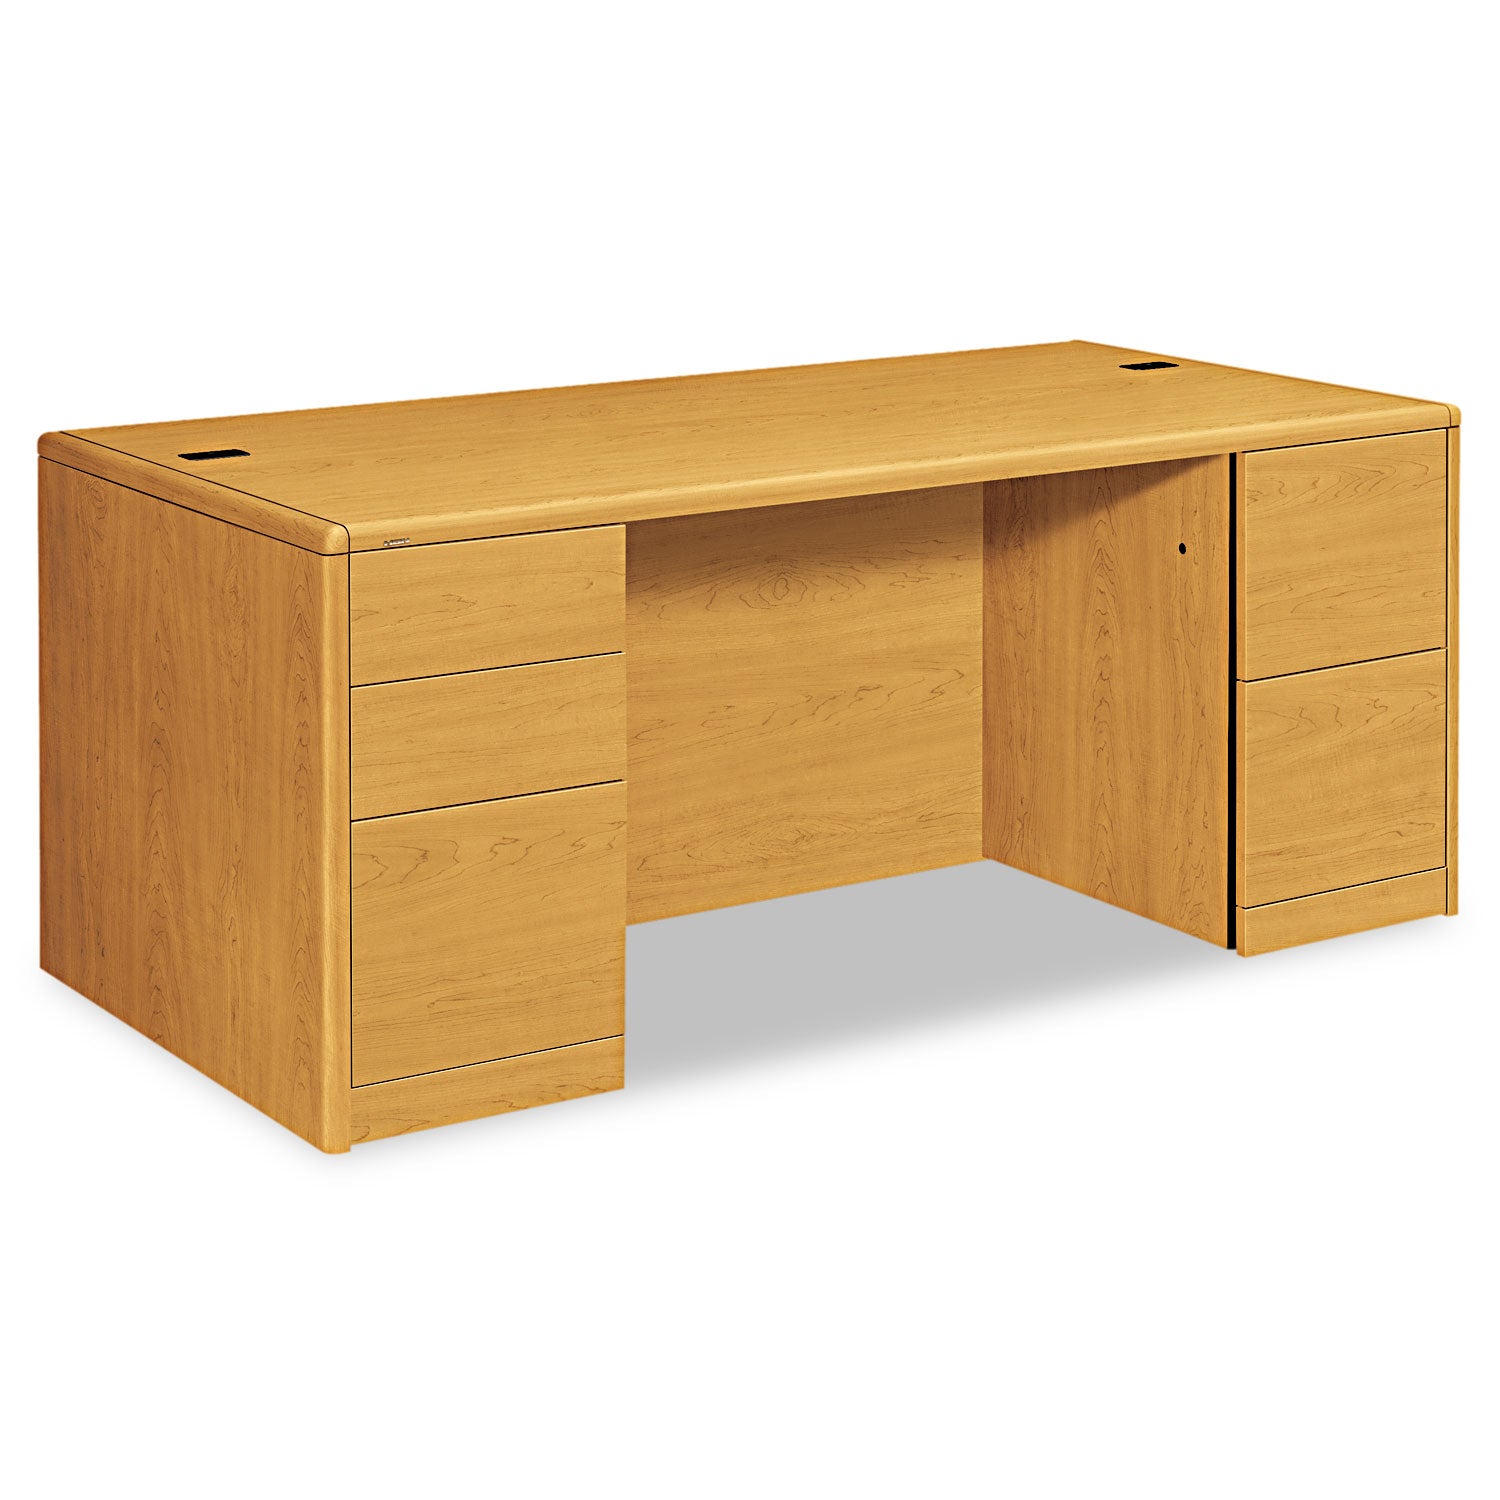 10700 Series Double Pedestal Desk with Full-Height Pedestals, 72" x 36" x 29.5", Harvest - 